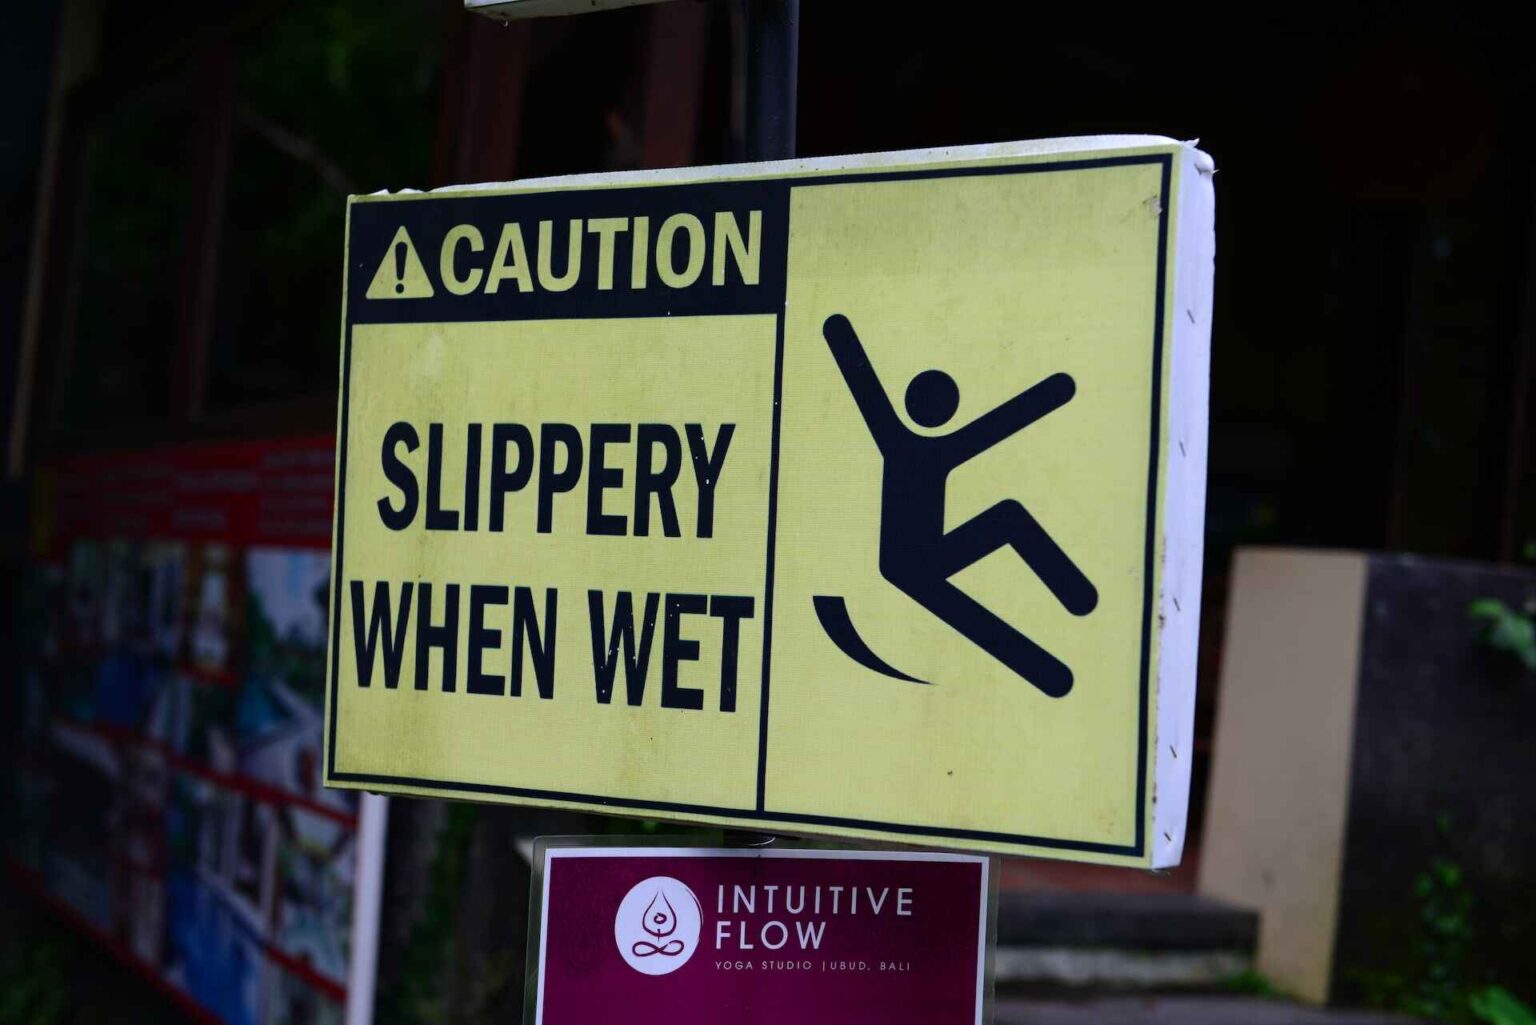 Yellow and black sign cautions “slippery when wet”, with slipping figure.